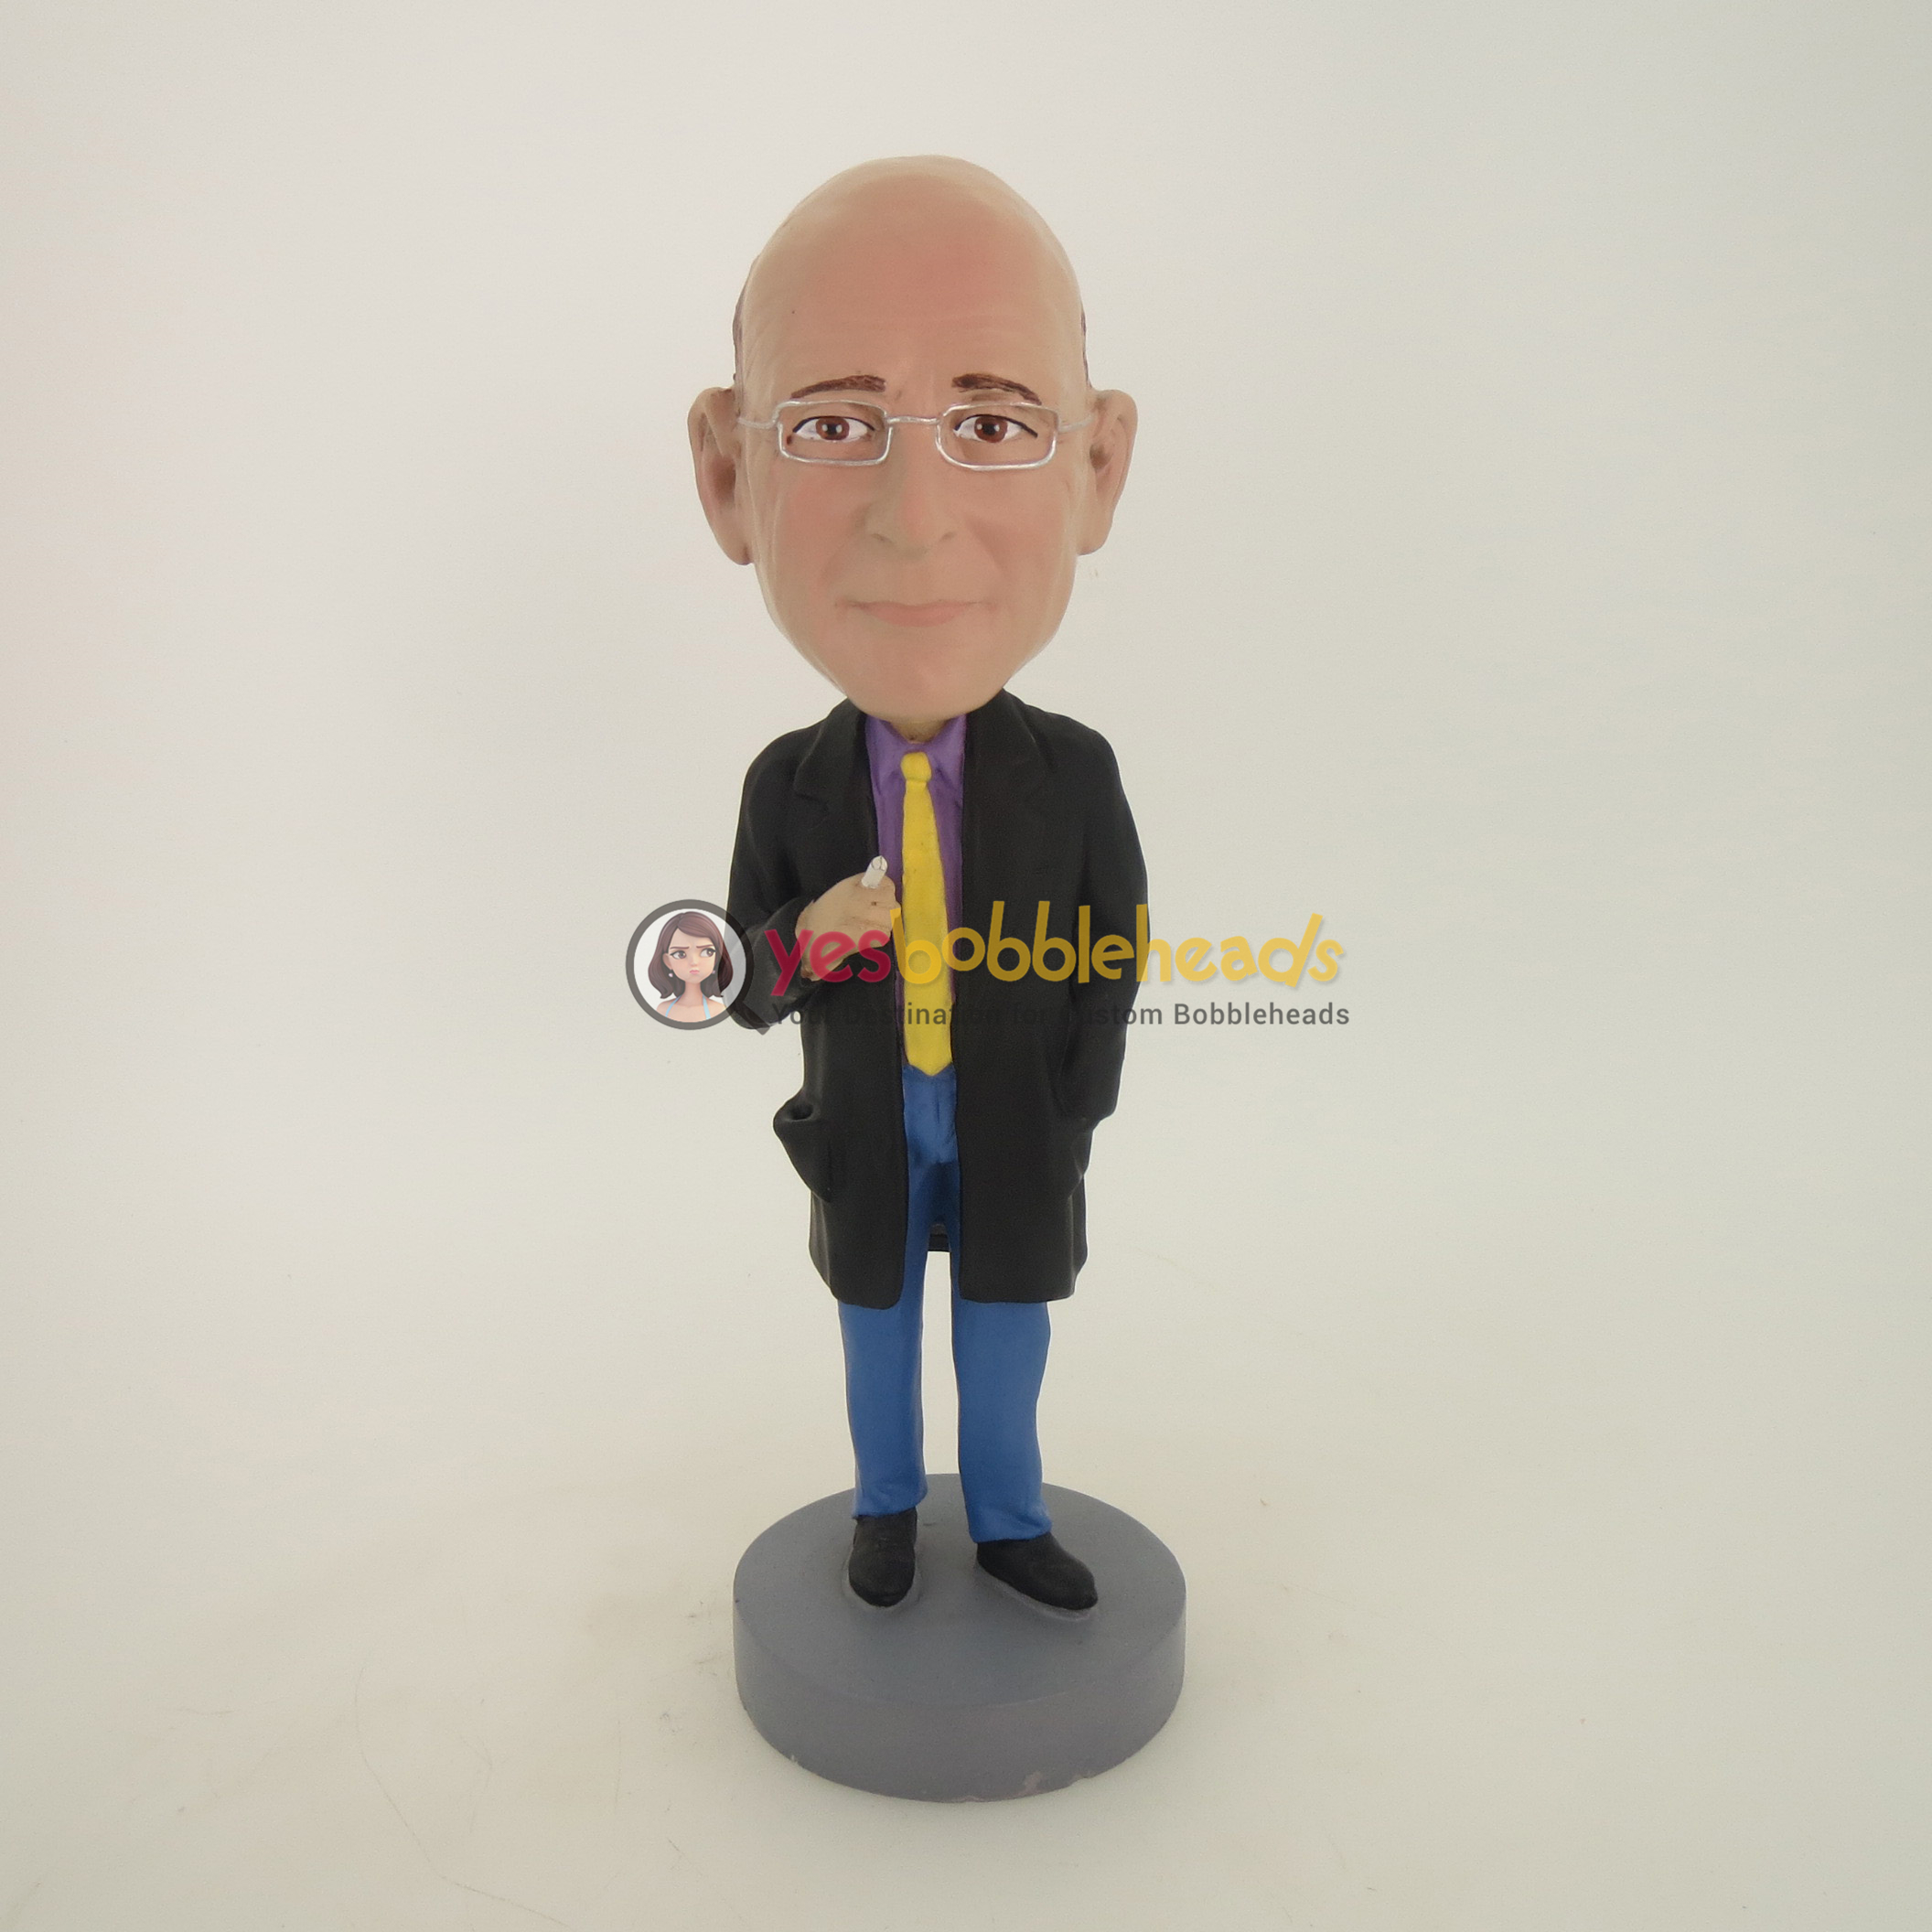 Picture of Custom Bobblehead Doll: Old Man Smoking